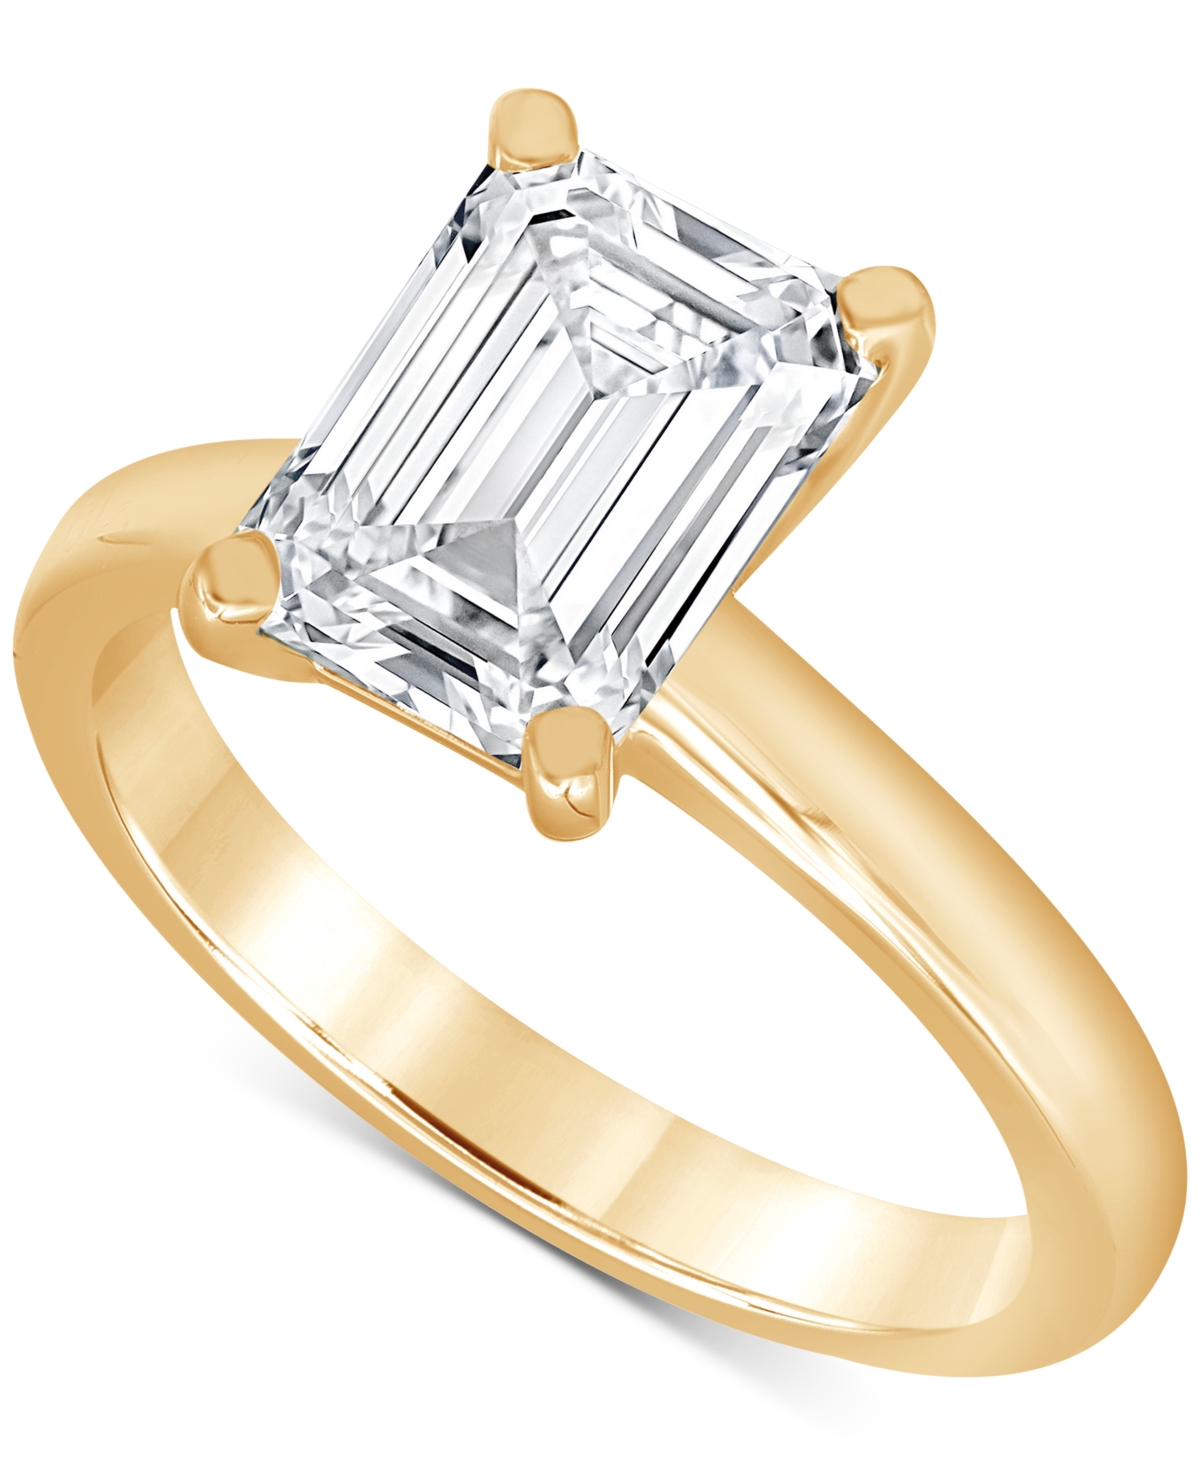 Certified Lab Grown Emerald-Cut Solitaire Engagement Ring (3 ct. t.w.) in 14k Gold - White Gold